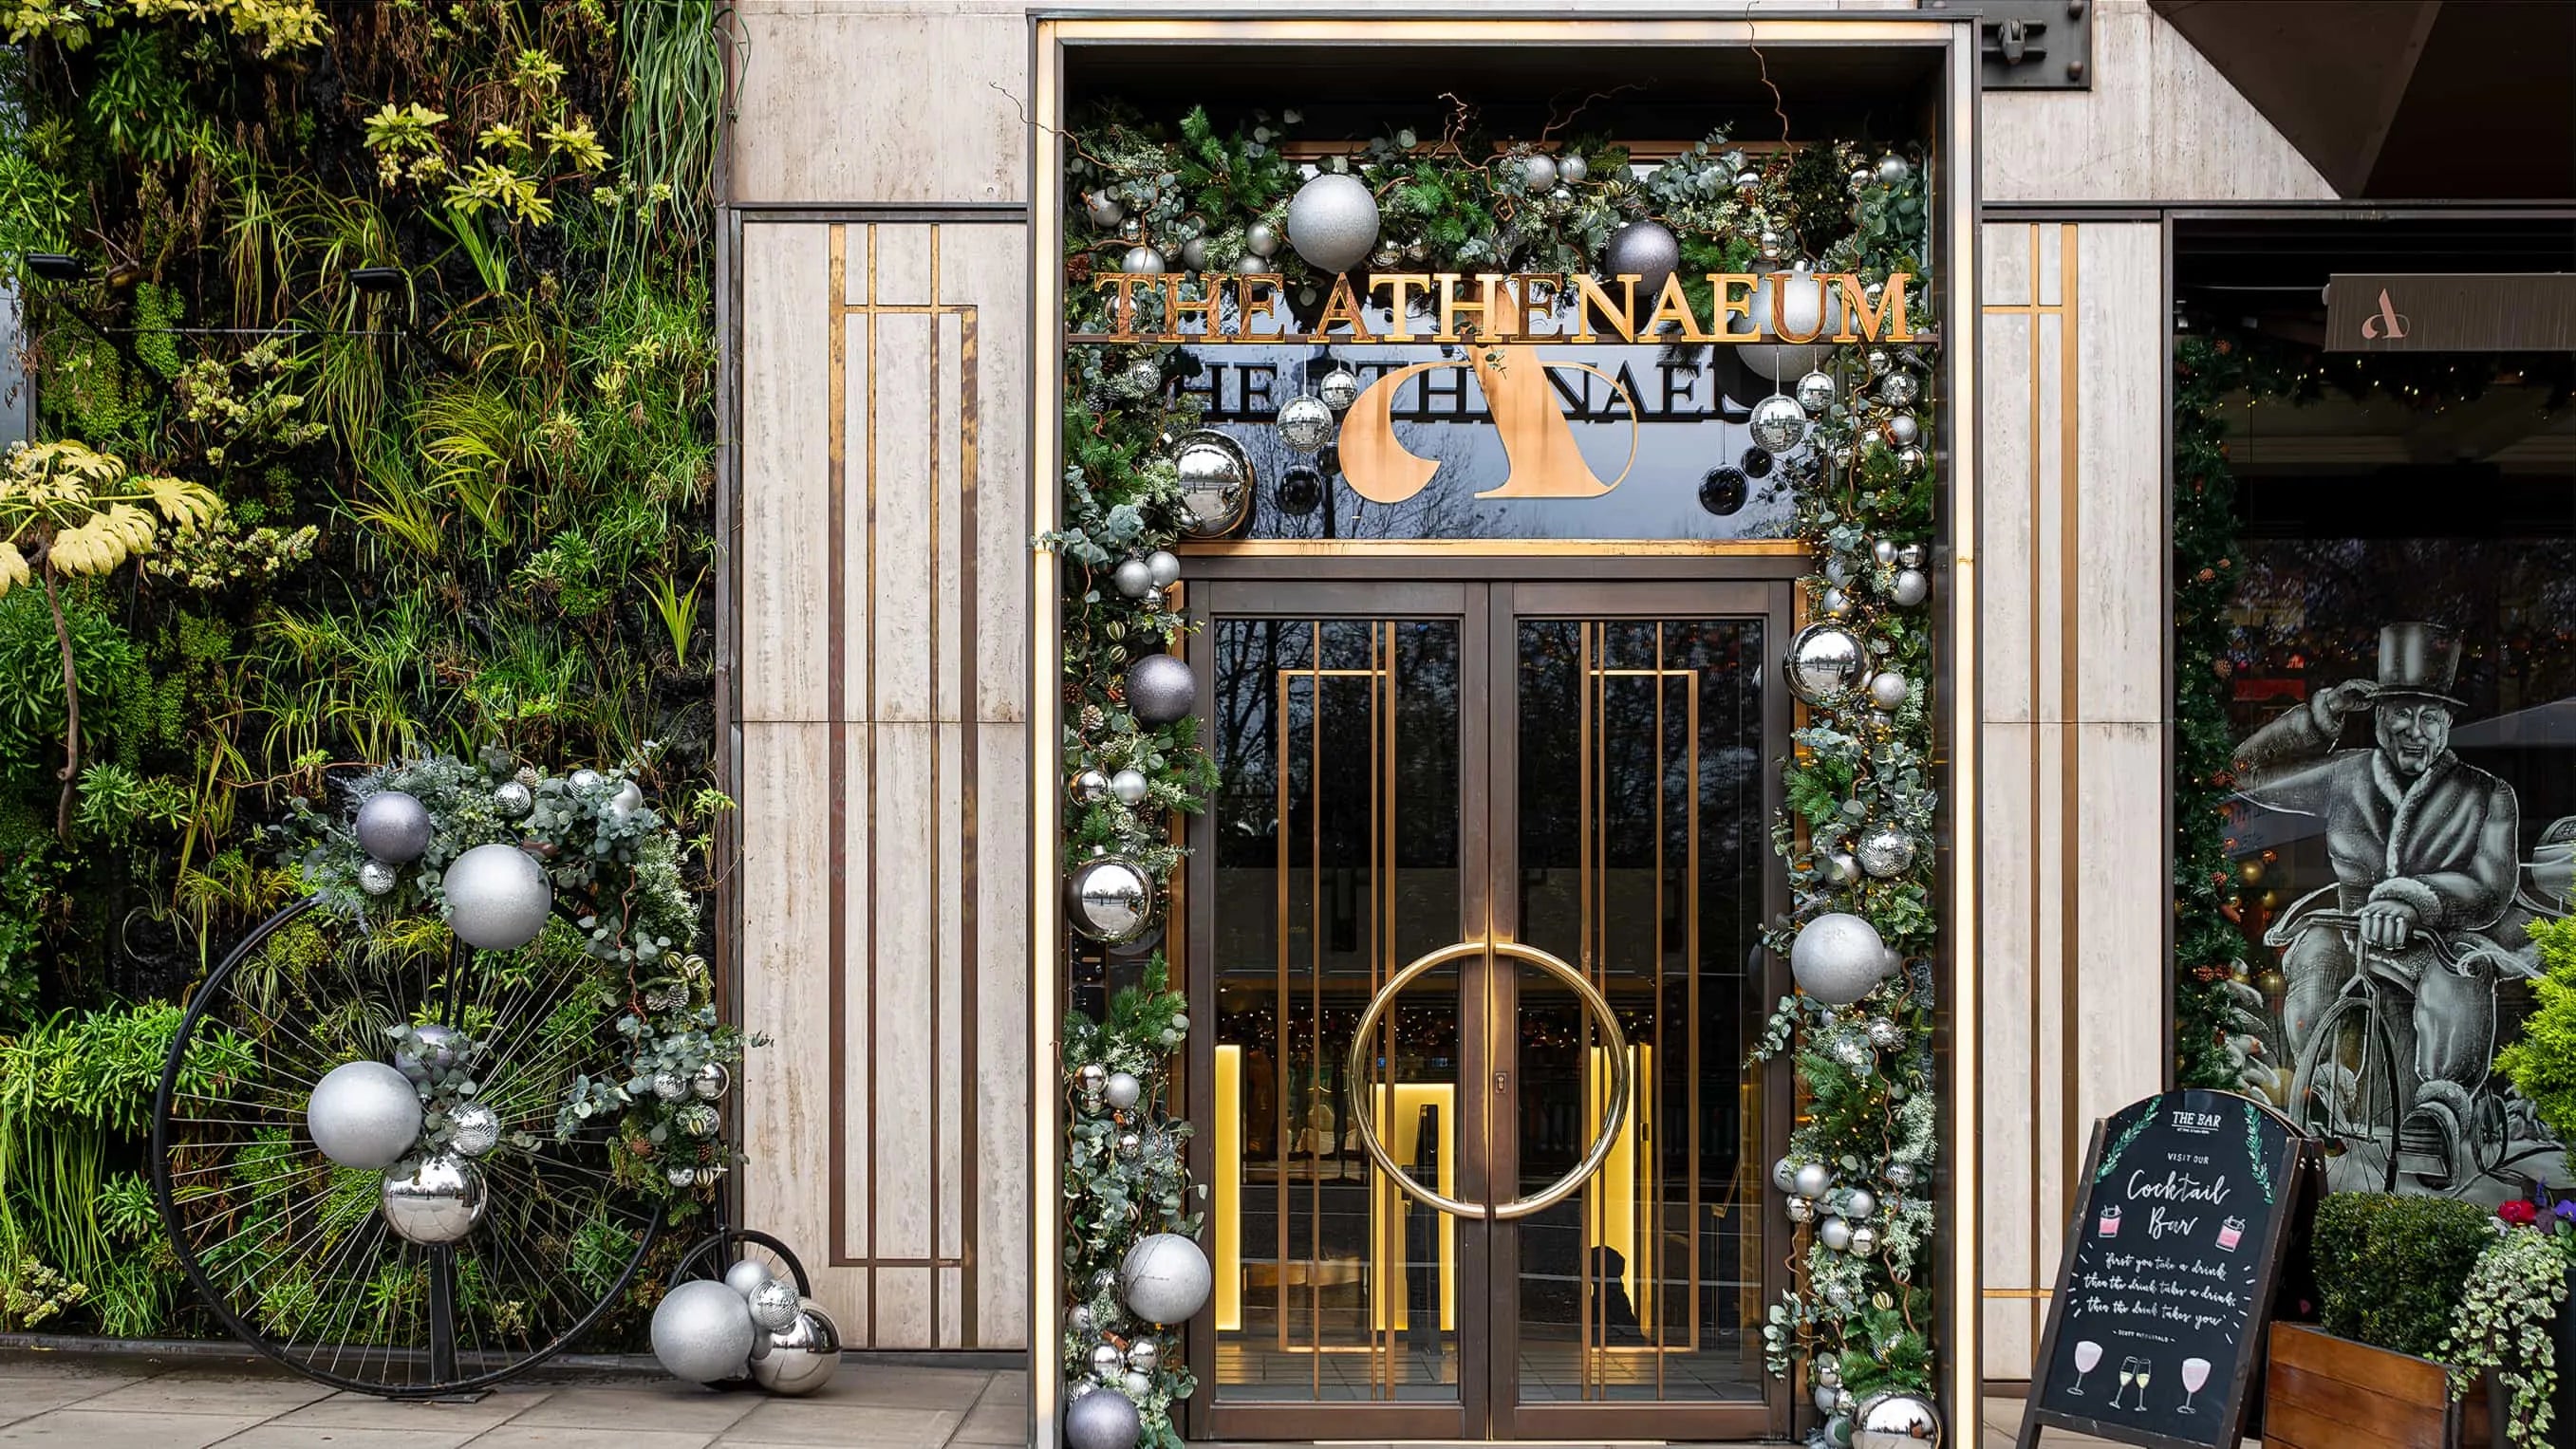 A grandiose Christmas floral arrangement for The Athenaeum in London by Amaranté London Event Florist, capturing the winter spirit with an opulent mix of festive greenery, twinkling lights, and elegant silver ornaments, perfectly framing the hotel's luxurious entrance.